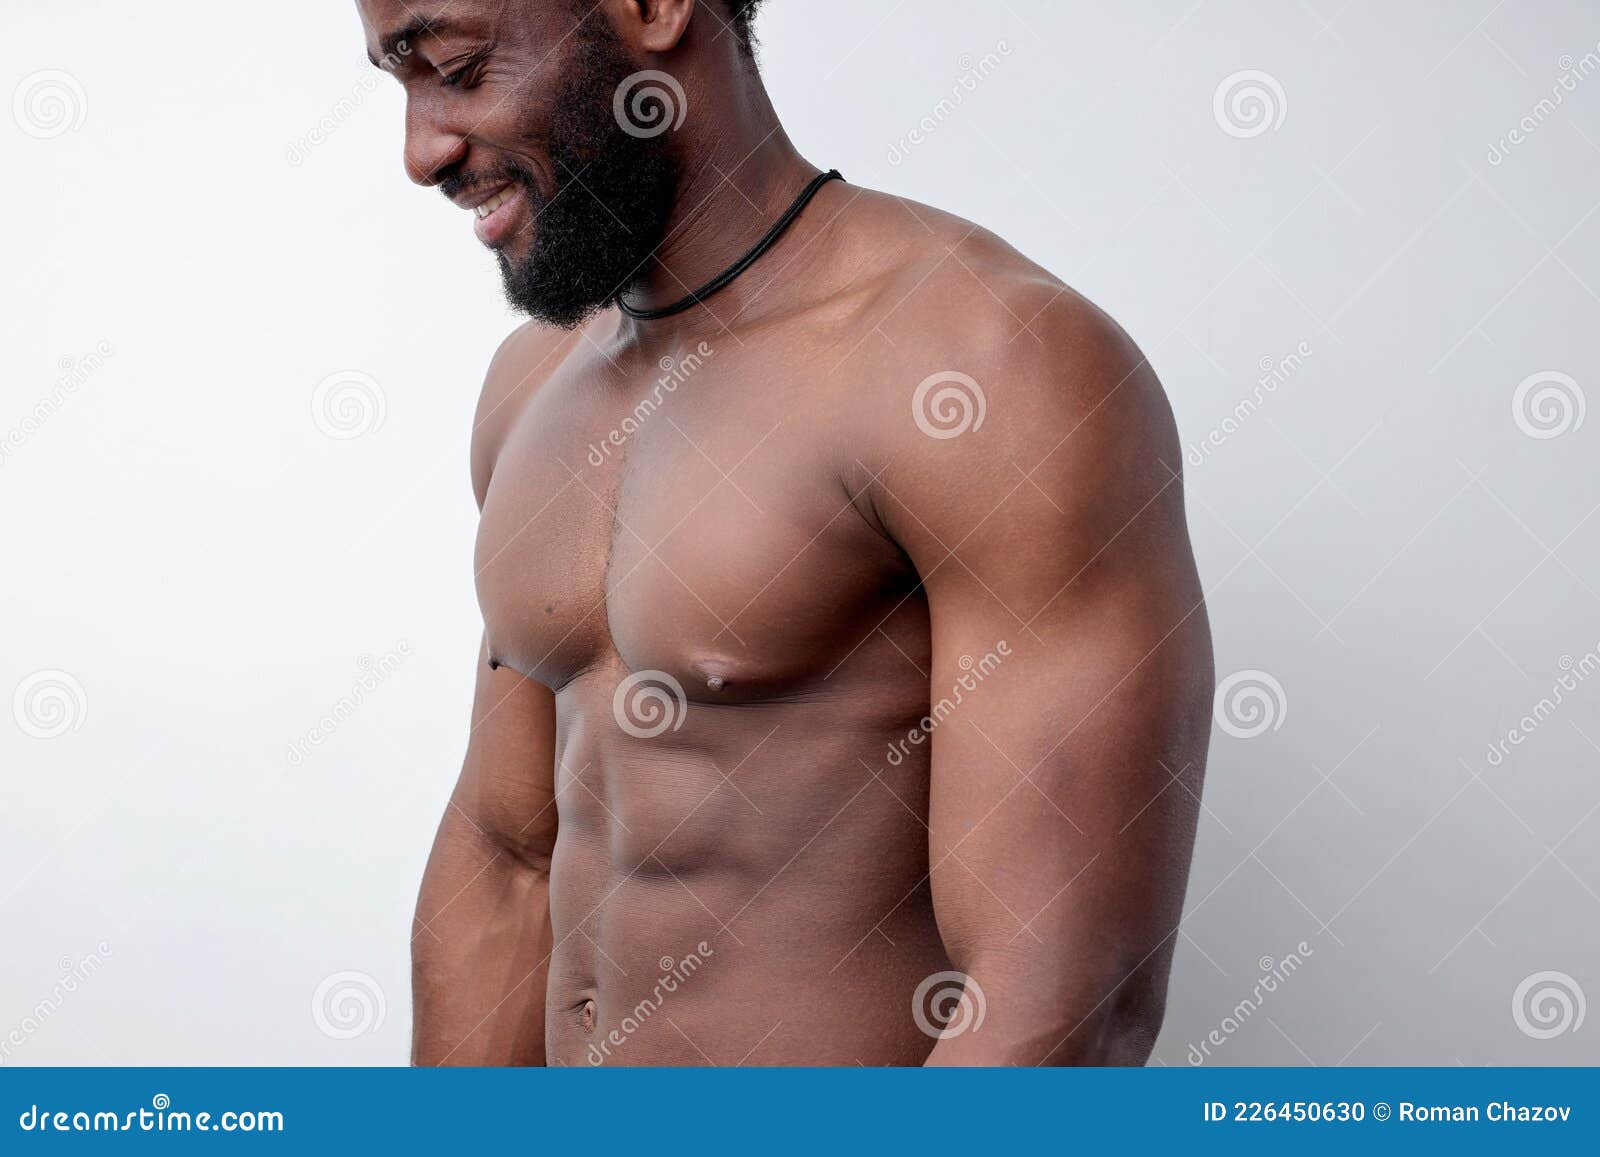 benjamin matherne recommends a black man naked pic